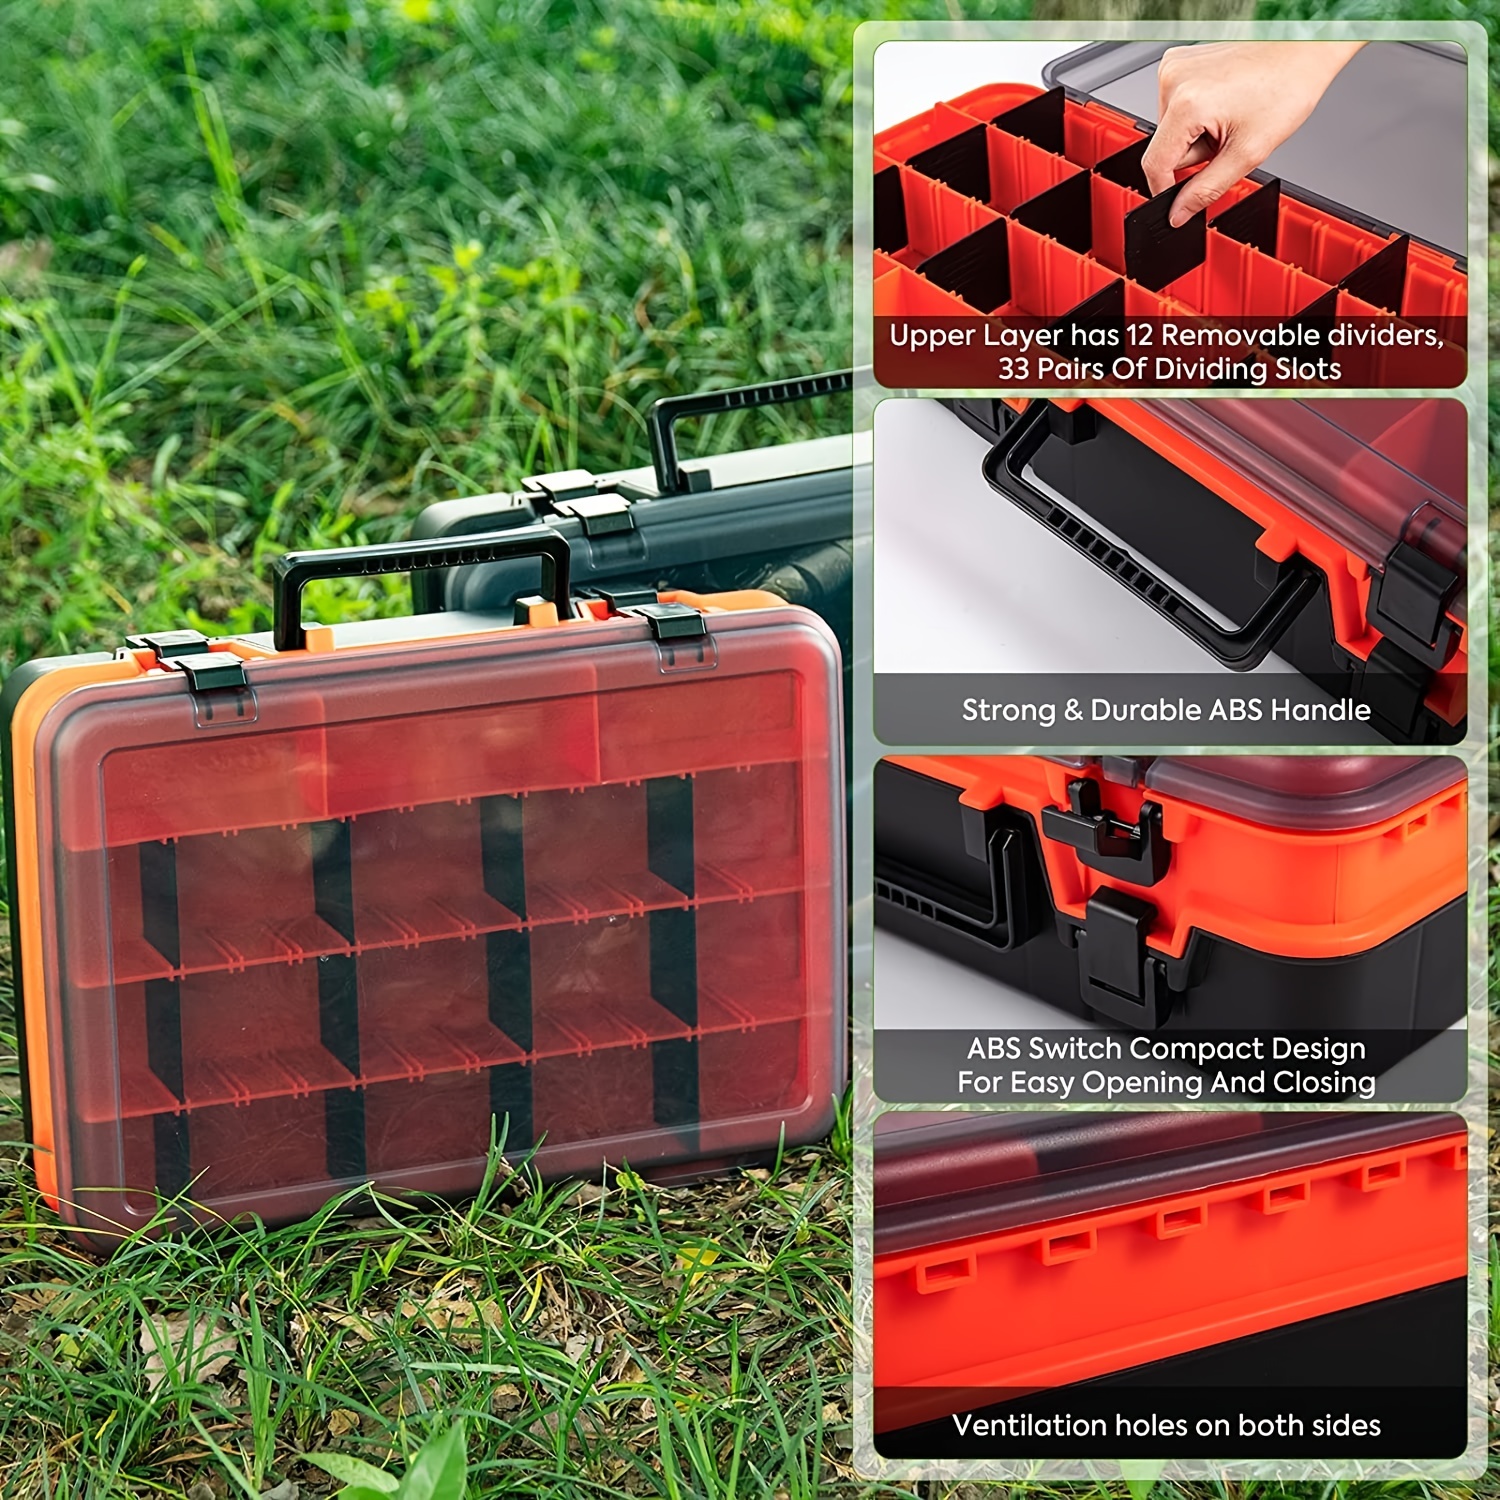 Accessories - The Tackle Box